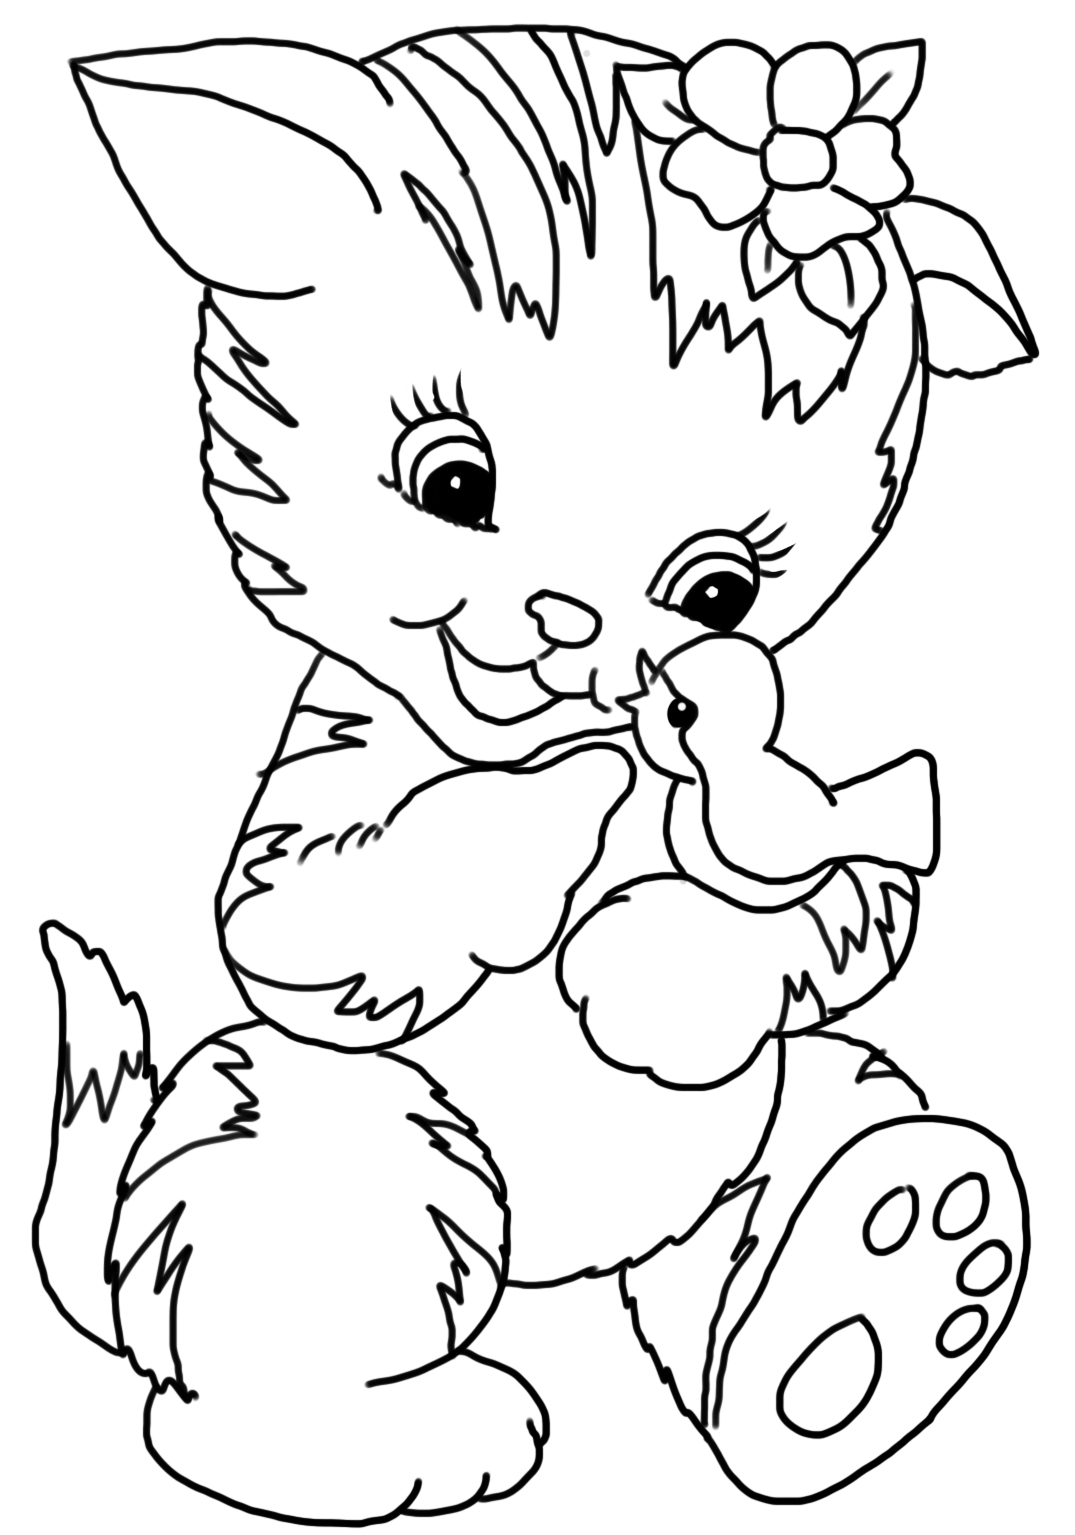 Cat Coloring Pages - 30 Free Printable Cat Coloring Pages